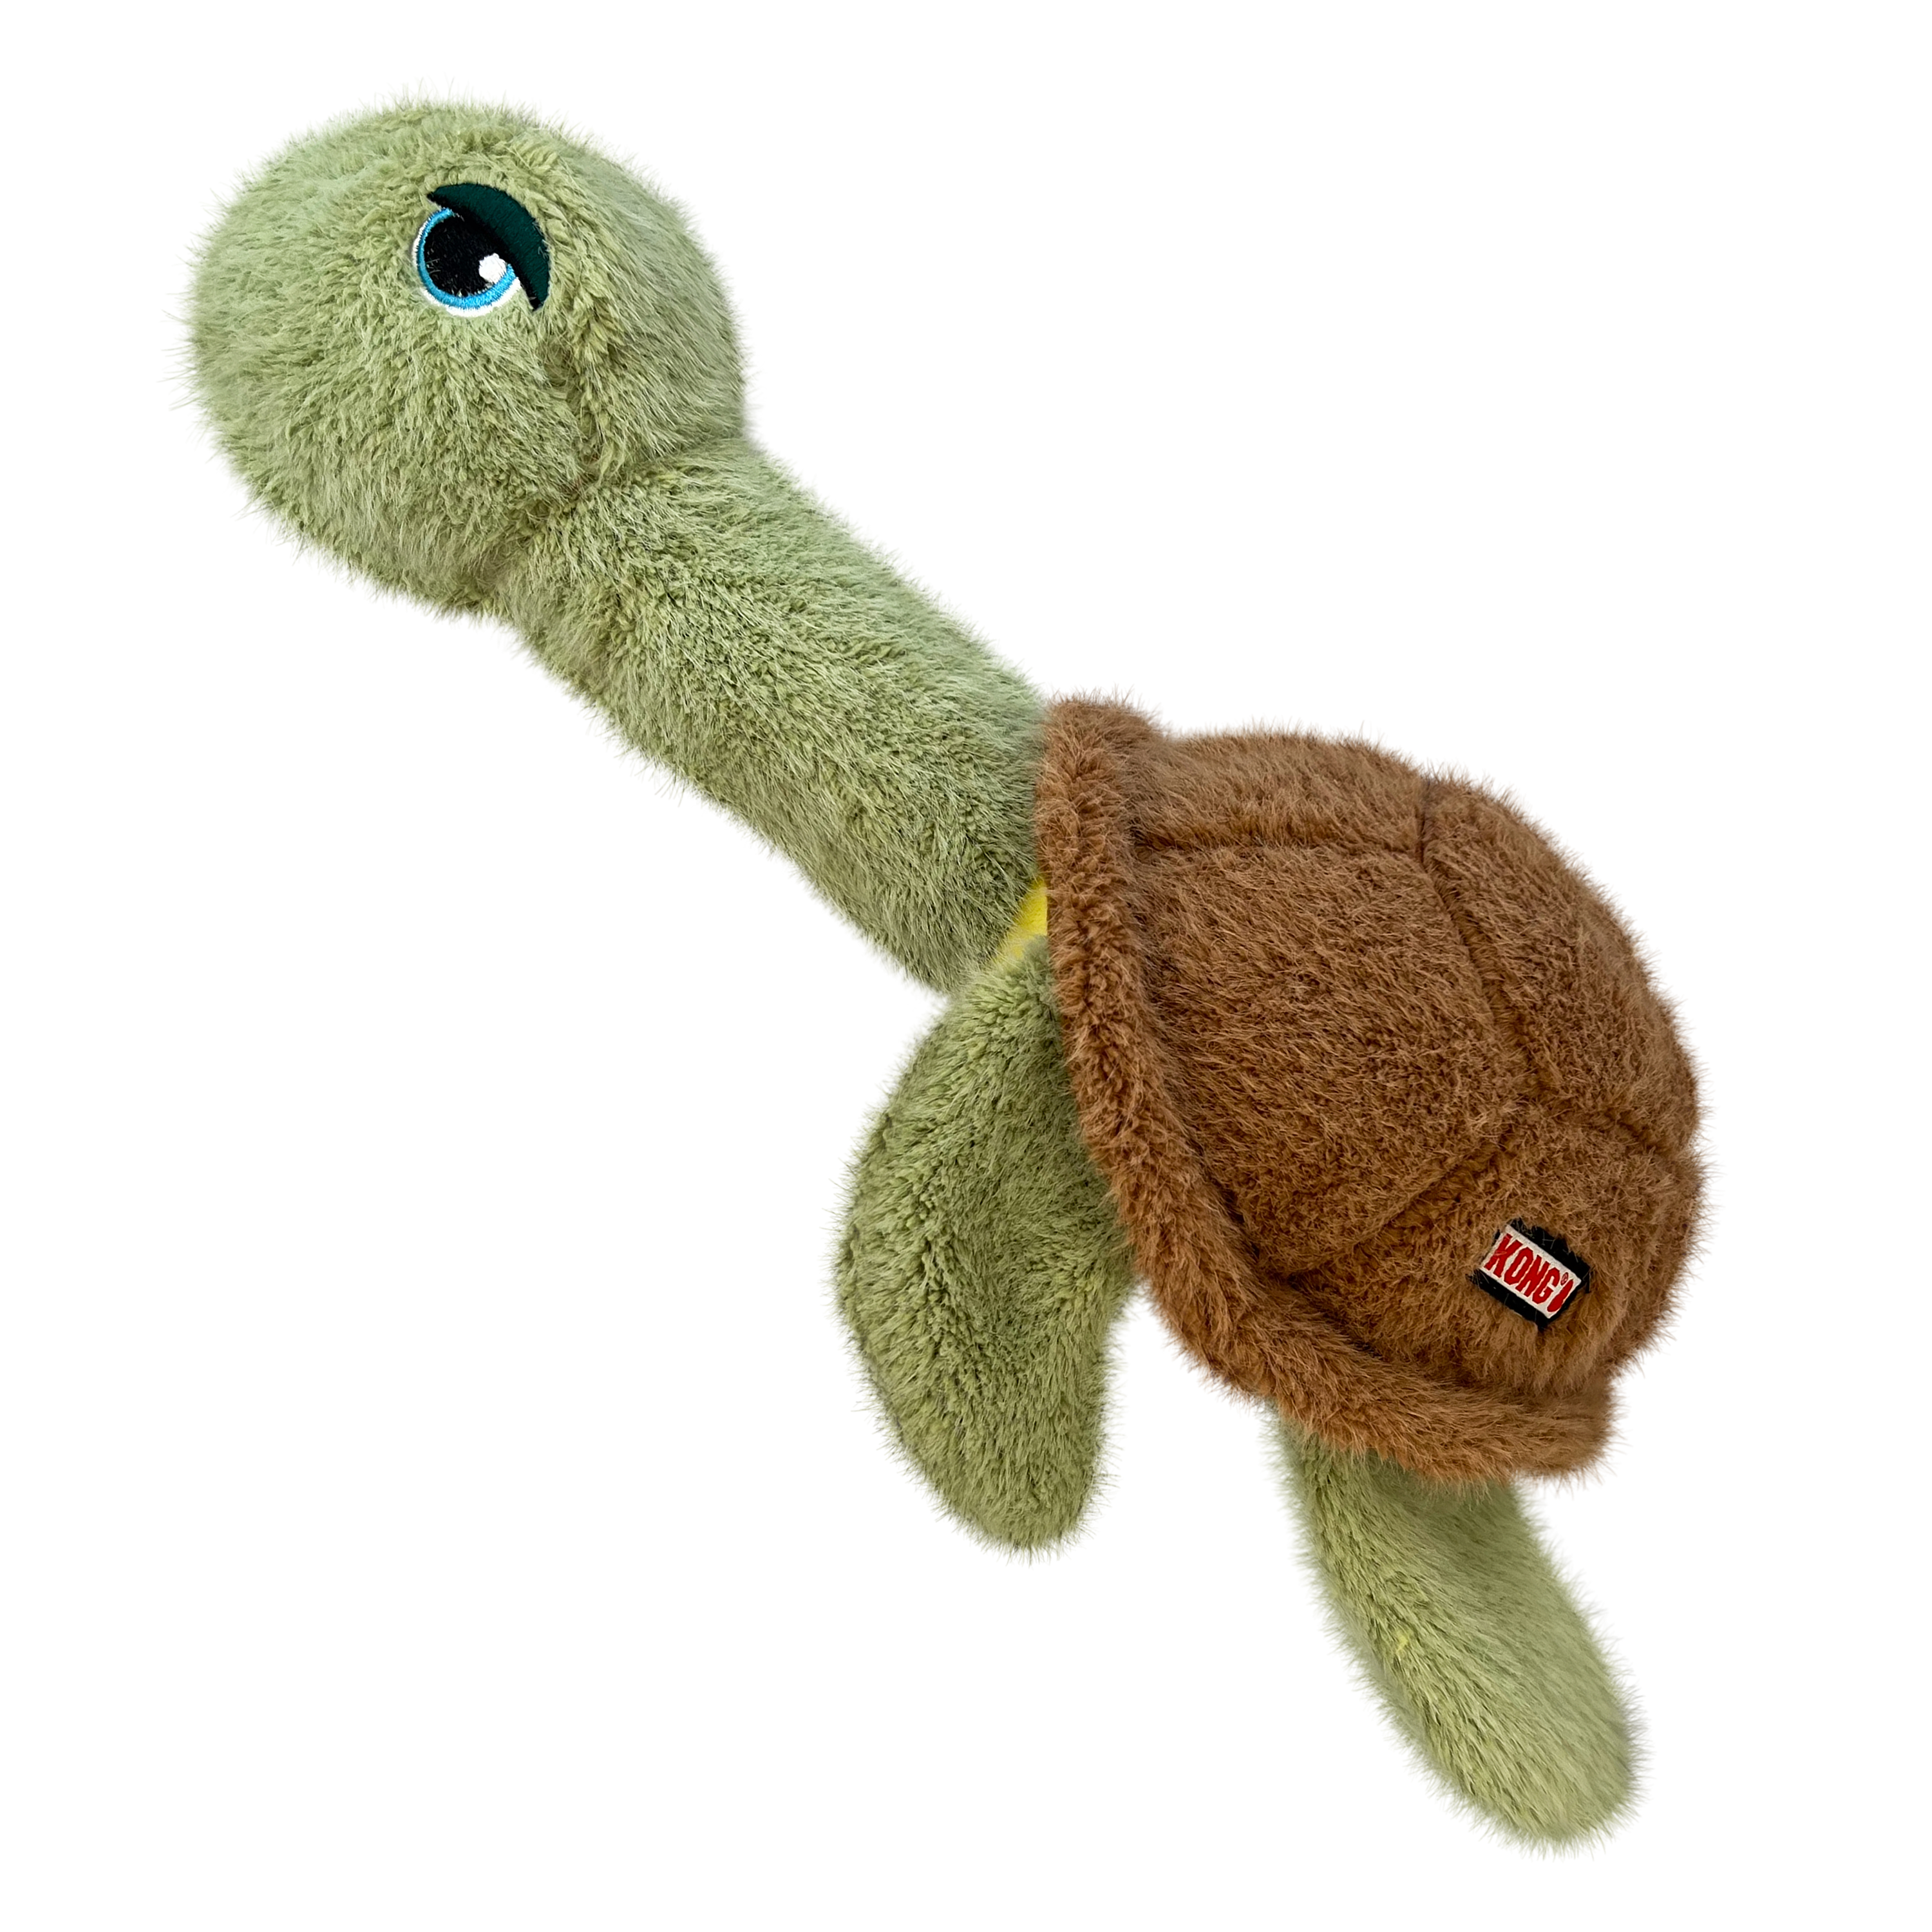 Scruffs Turtle offpack product image